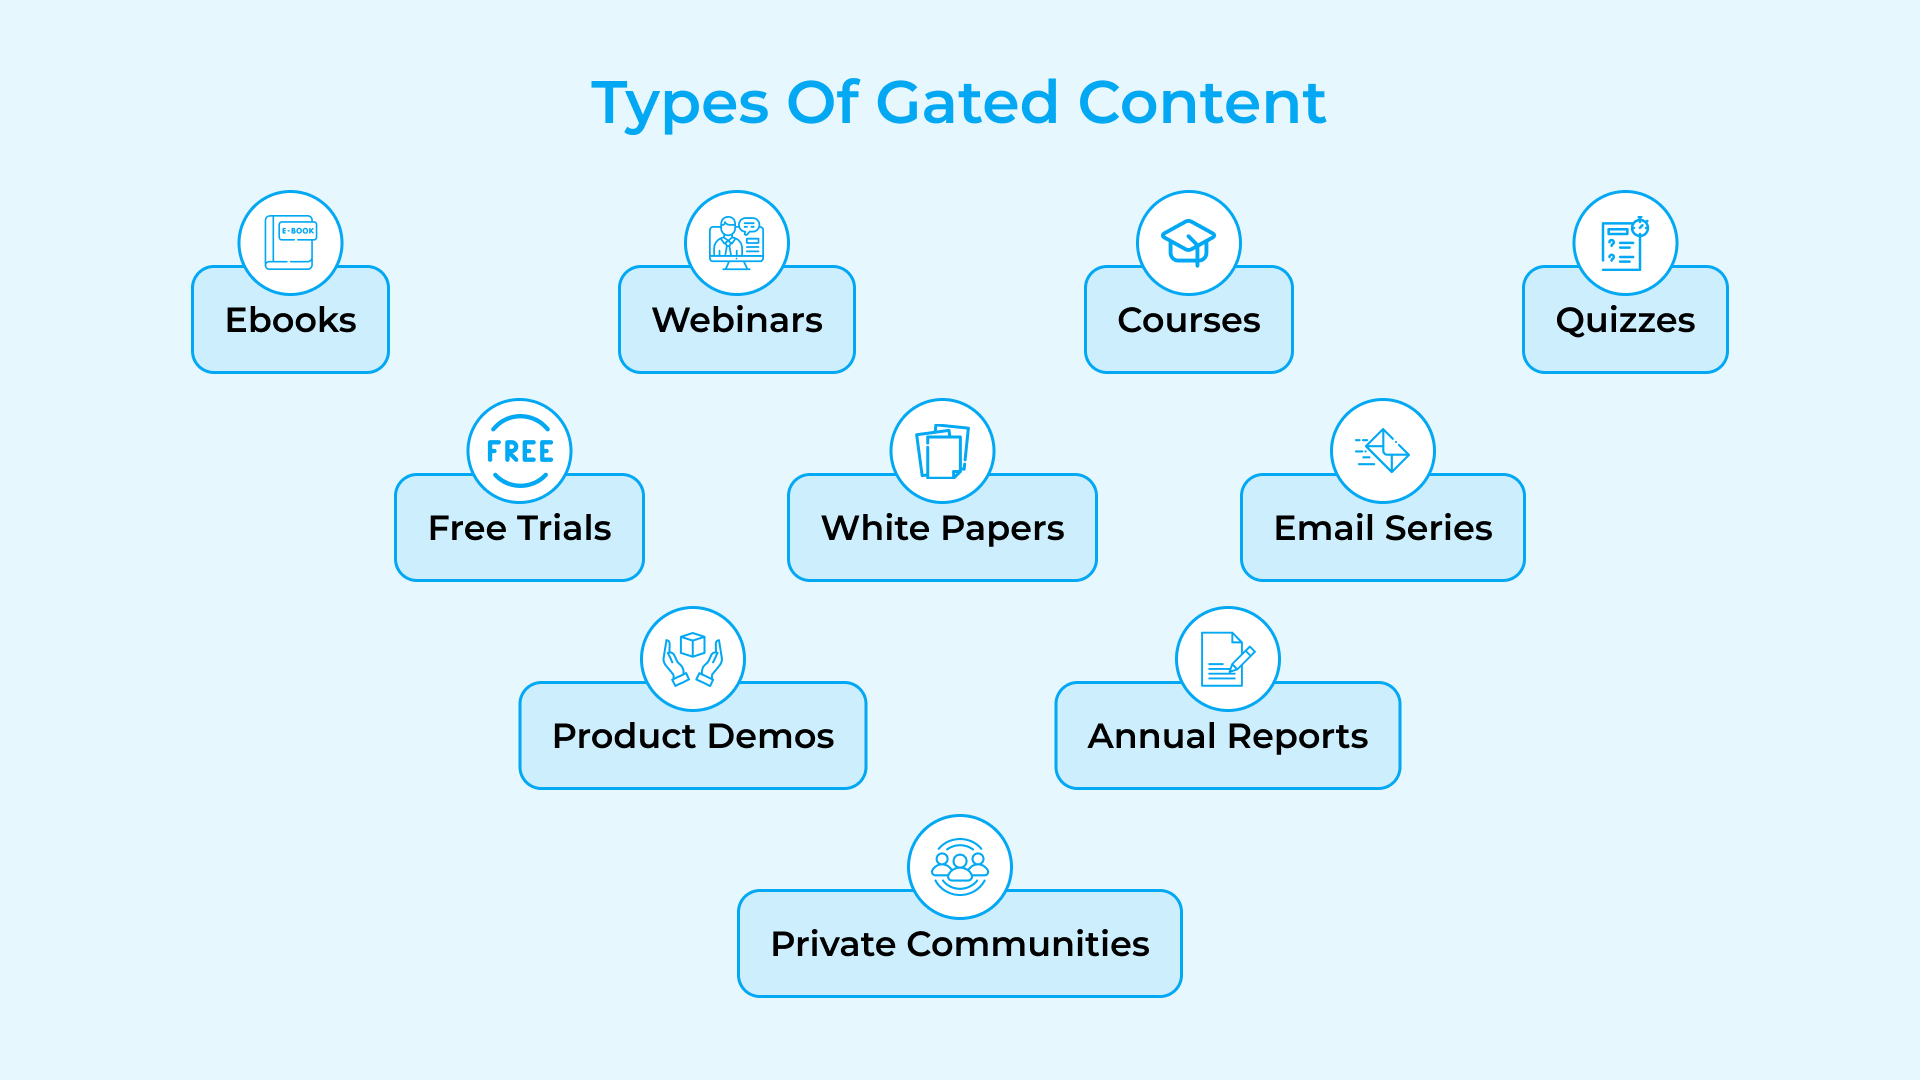 Types of Gated Content